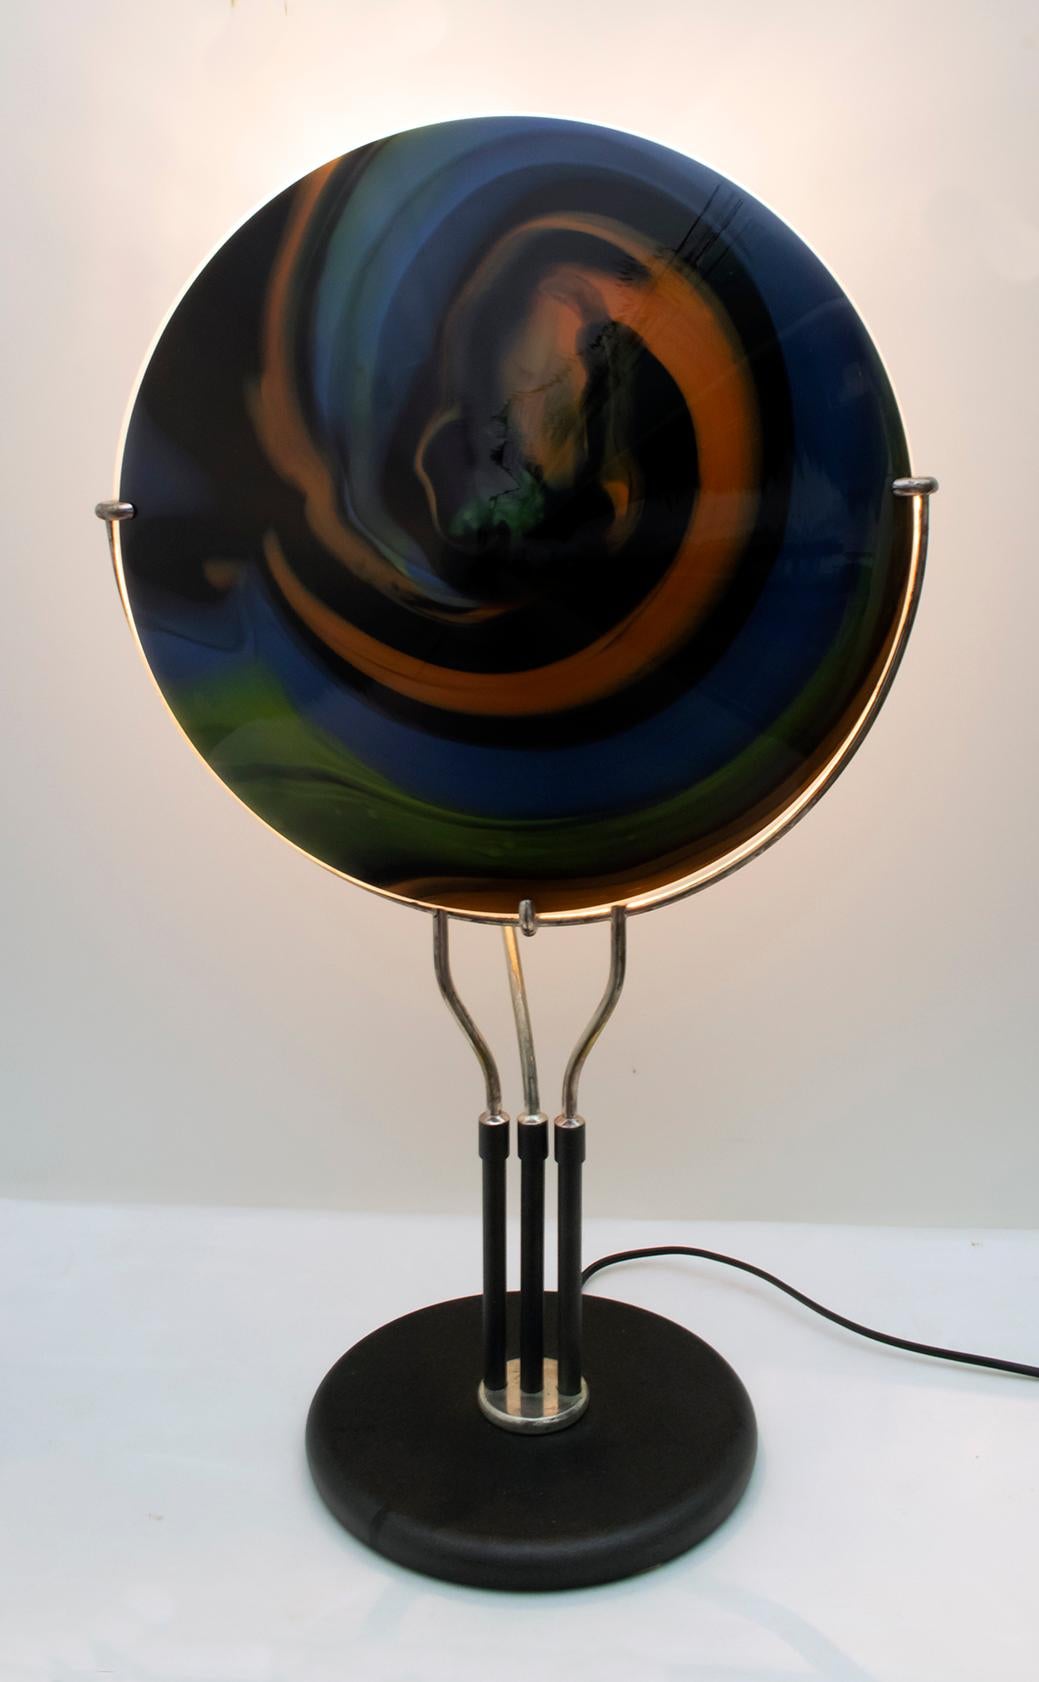 Murano glass lamp designed by Ottavio Missoni and produced by Arte Vetro Murano in the 1980s. The structure is in silver and black metal.

